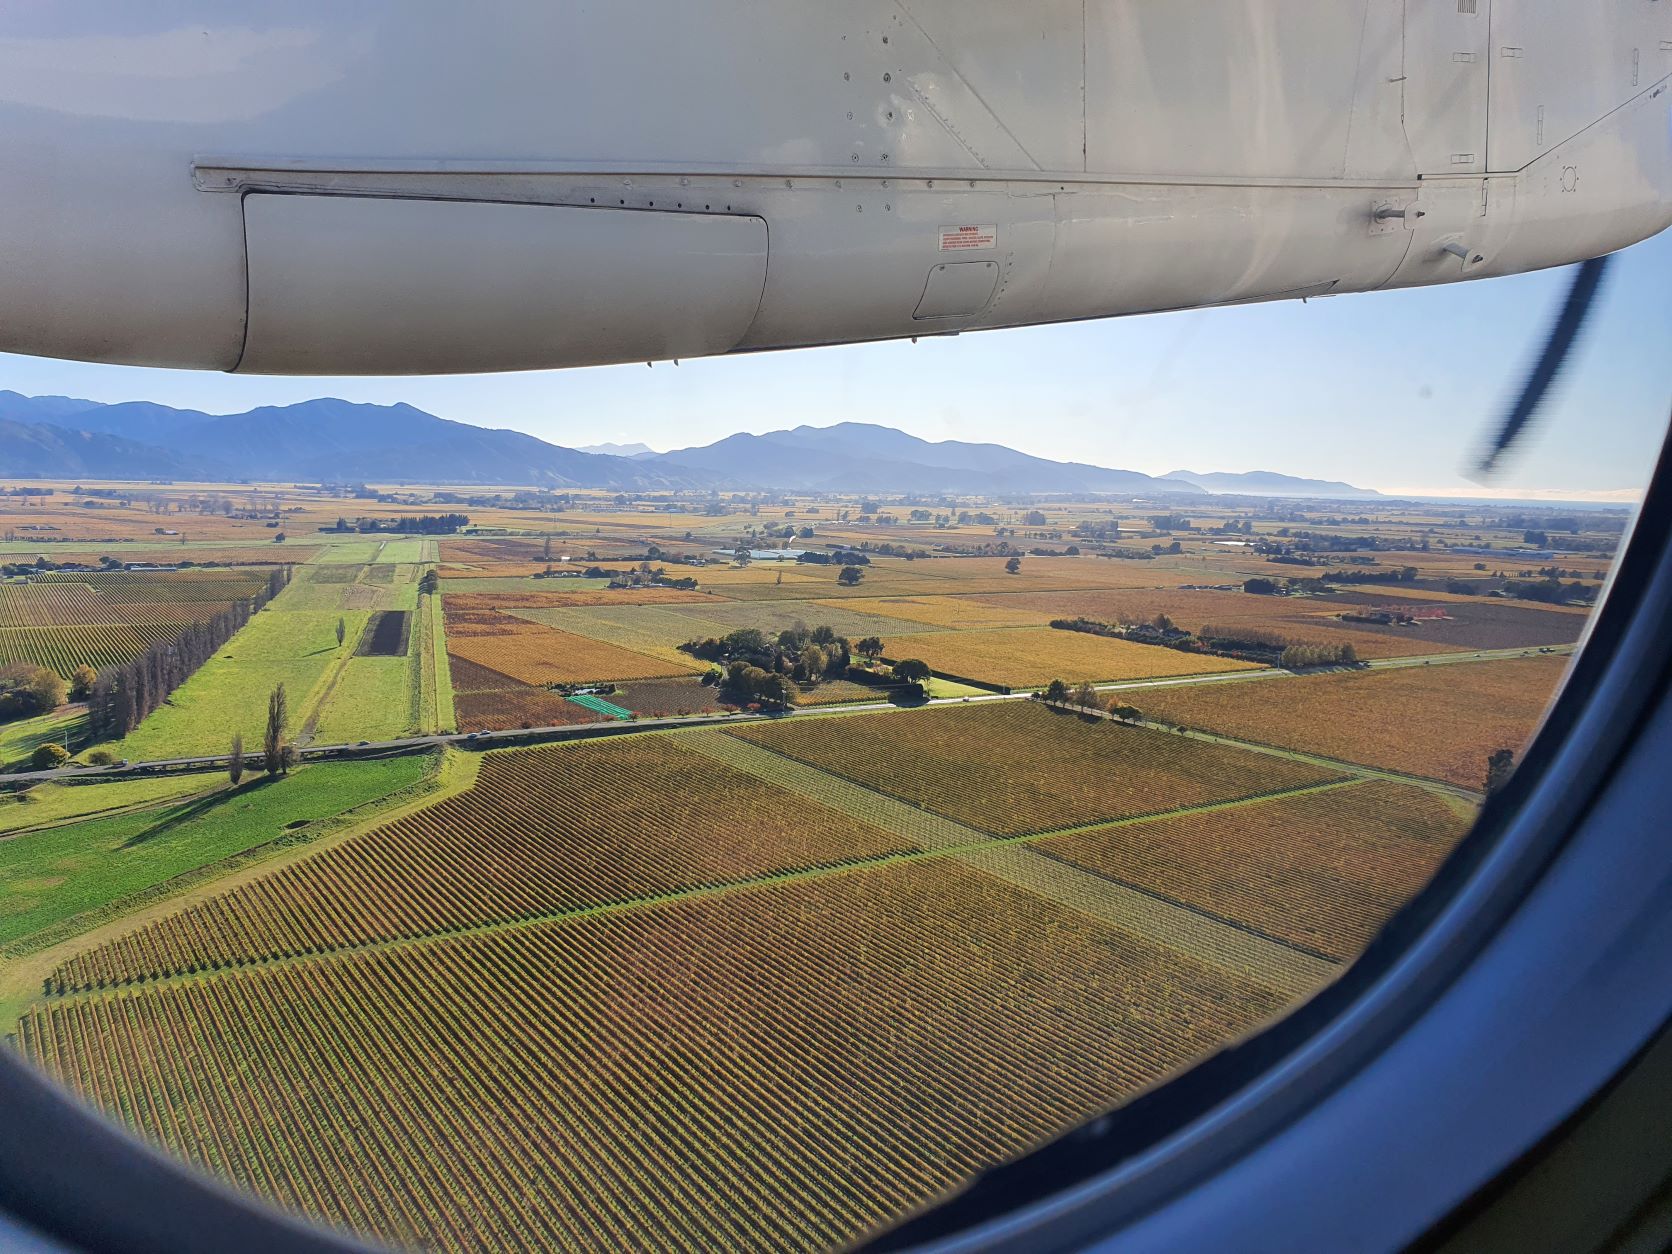 View of Marlborough and Blenheim, New Zealand from the window of a plane